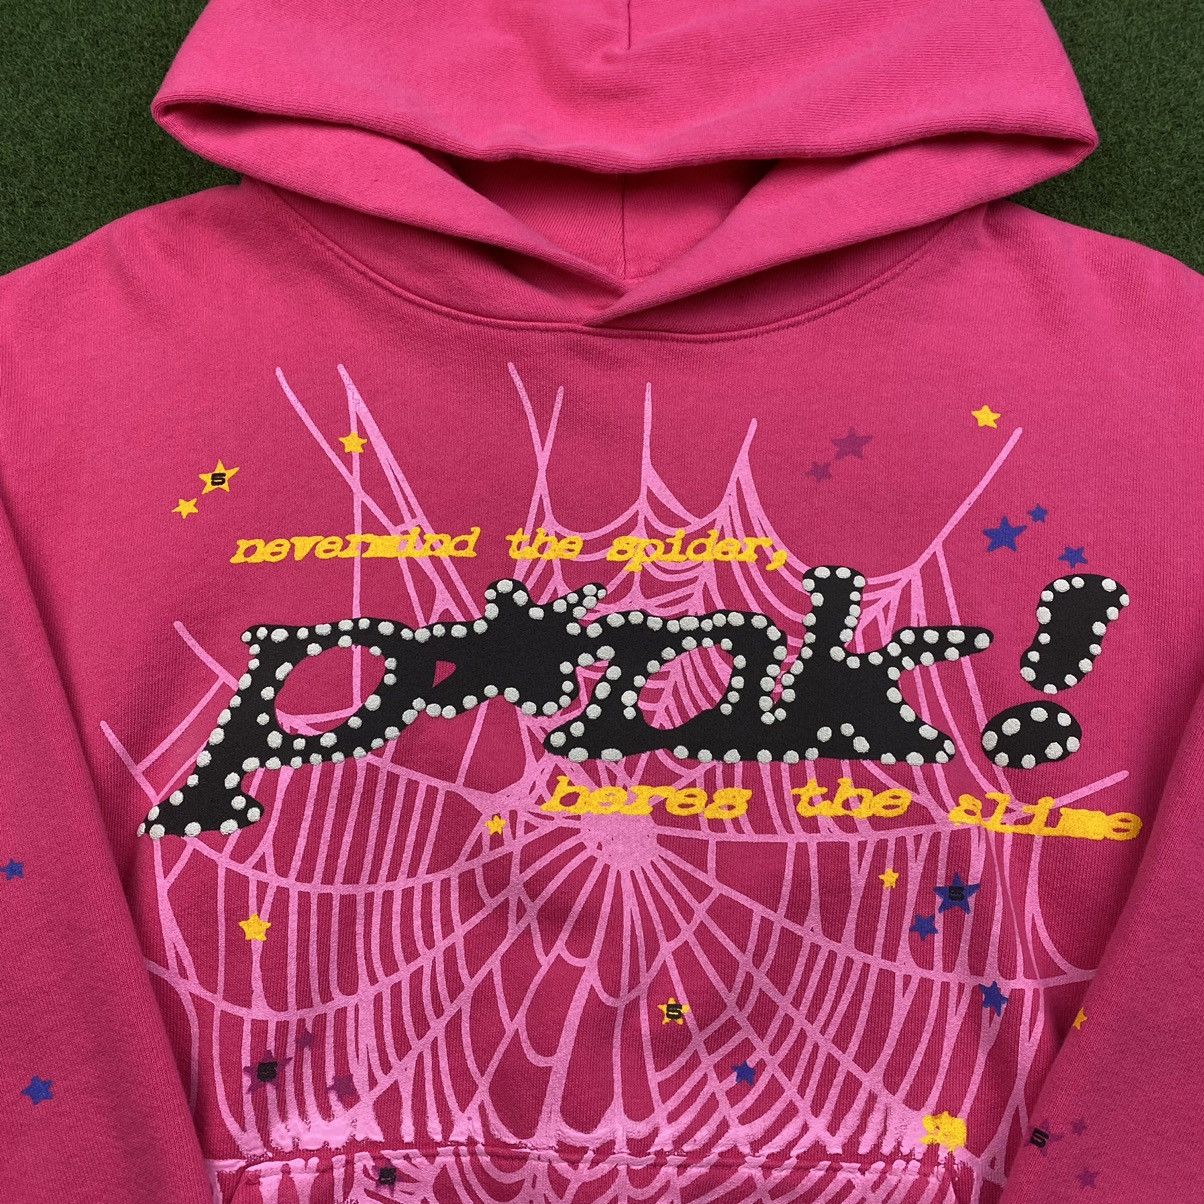 Spider Worldwide Spider Punk Hoodie Young Thug Size US S / EU 44-46 / 1 - 2 Preview